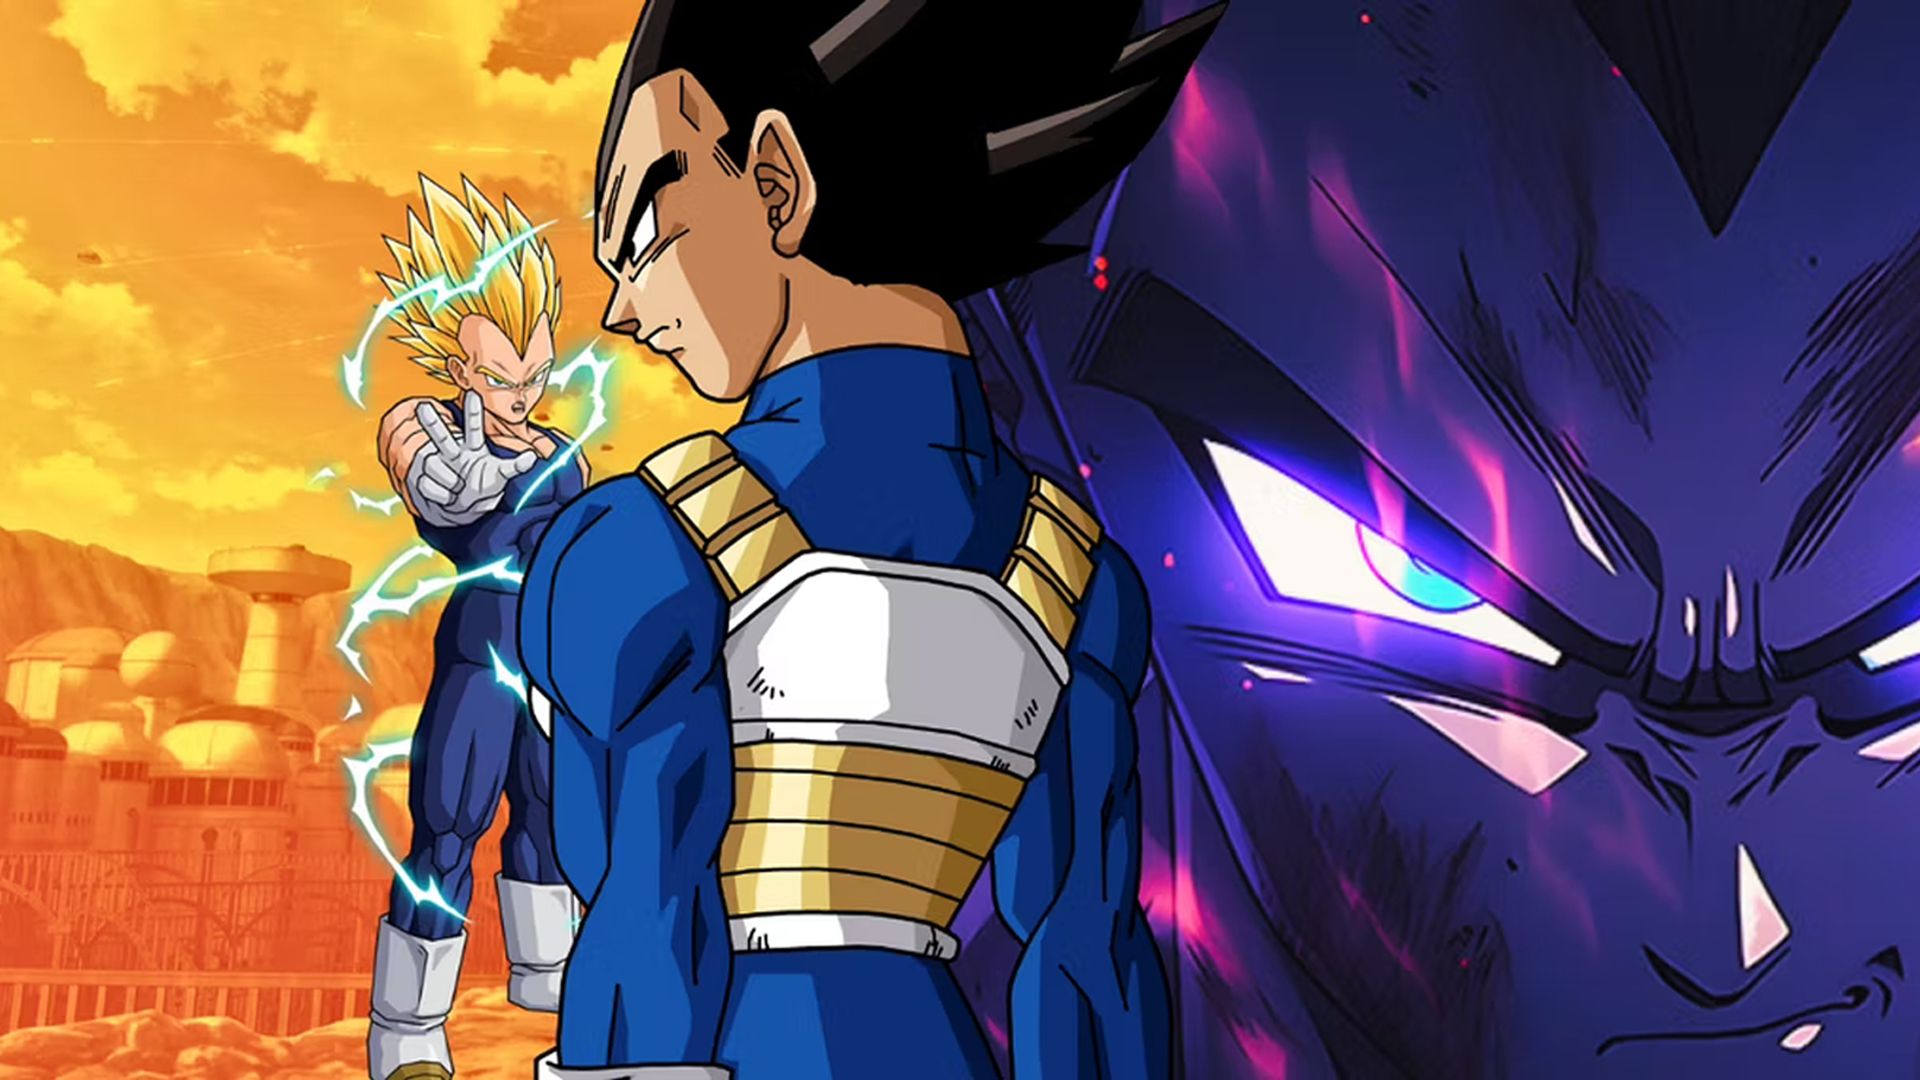 Most Powerful Vegeta's Forms In Dragon Ball, Ranked